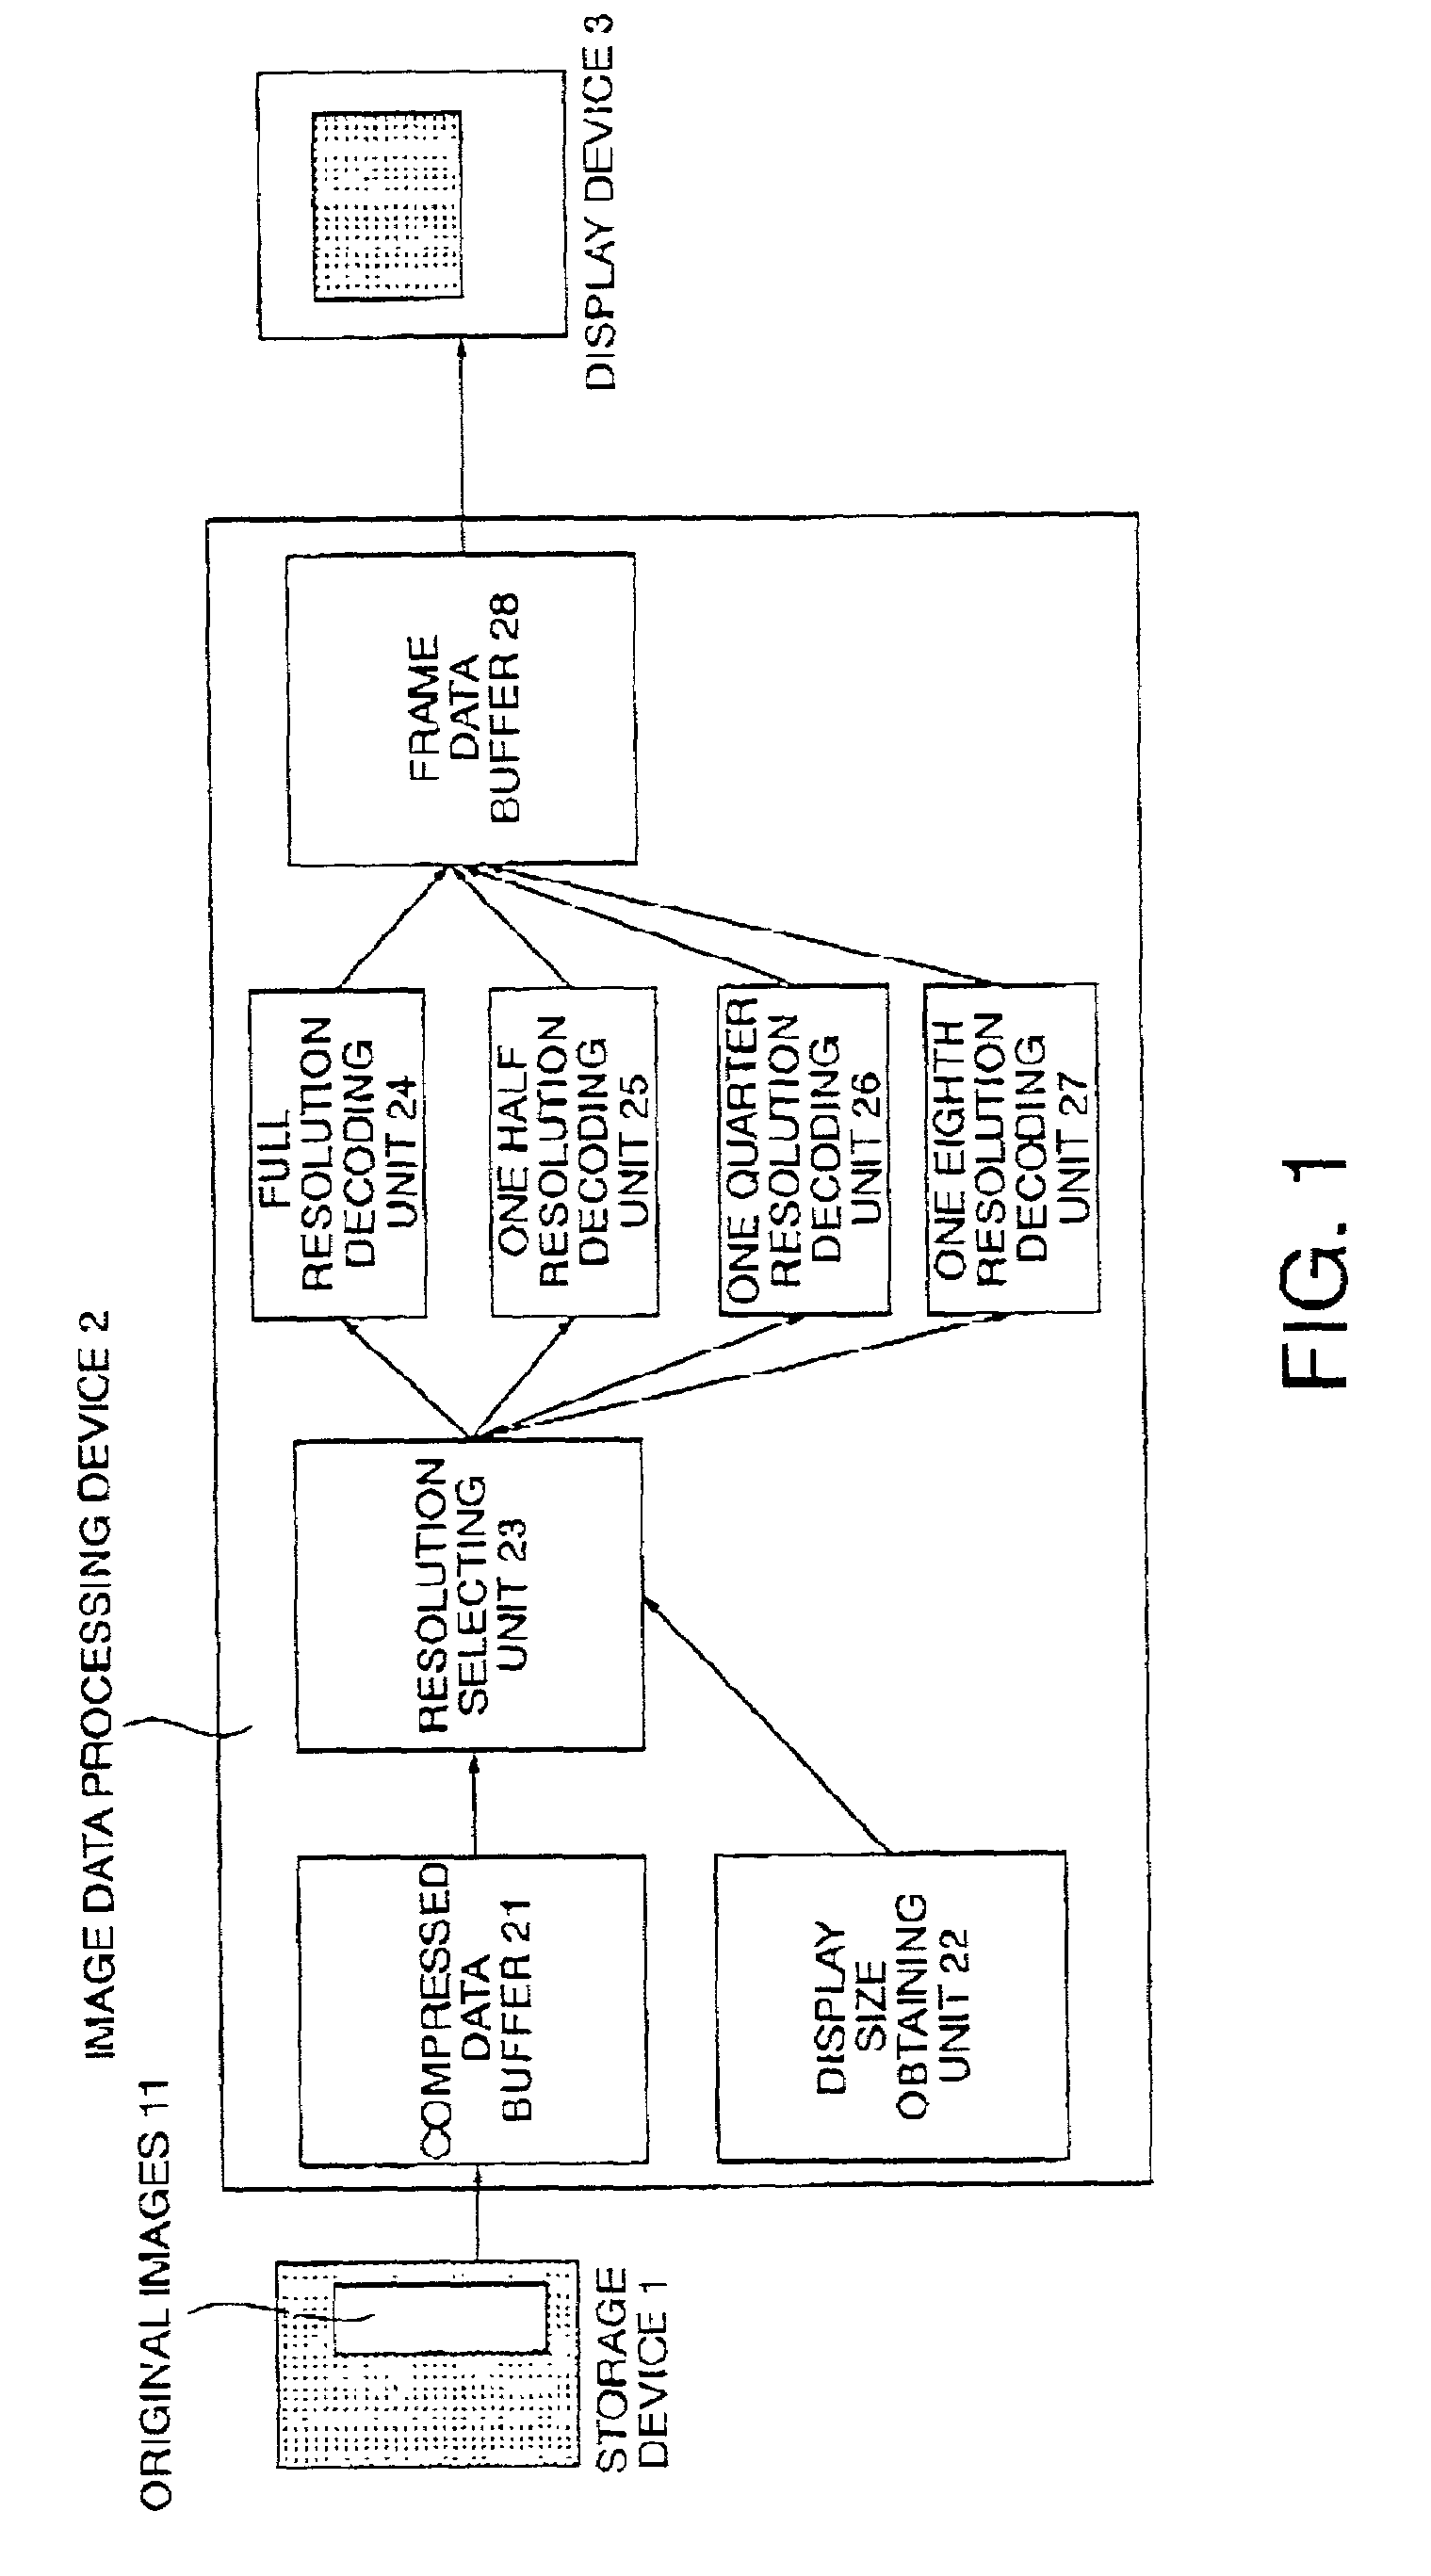 Moving picture reproducing device and method of reproducing a moving picture